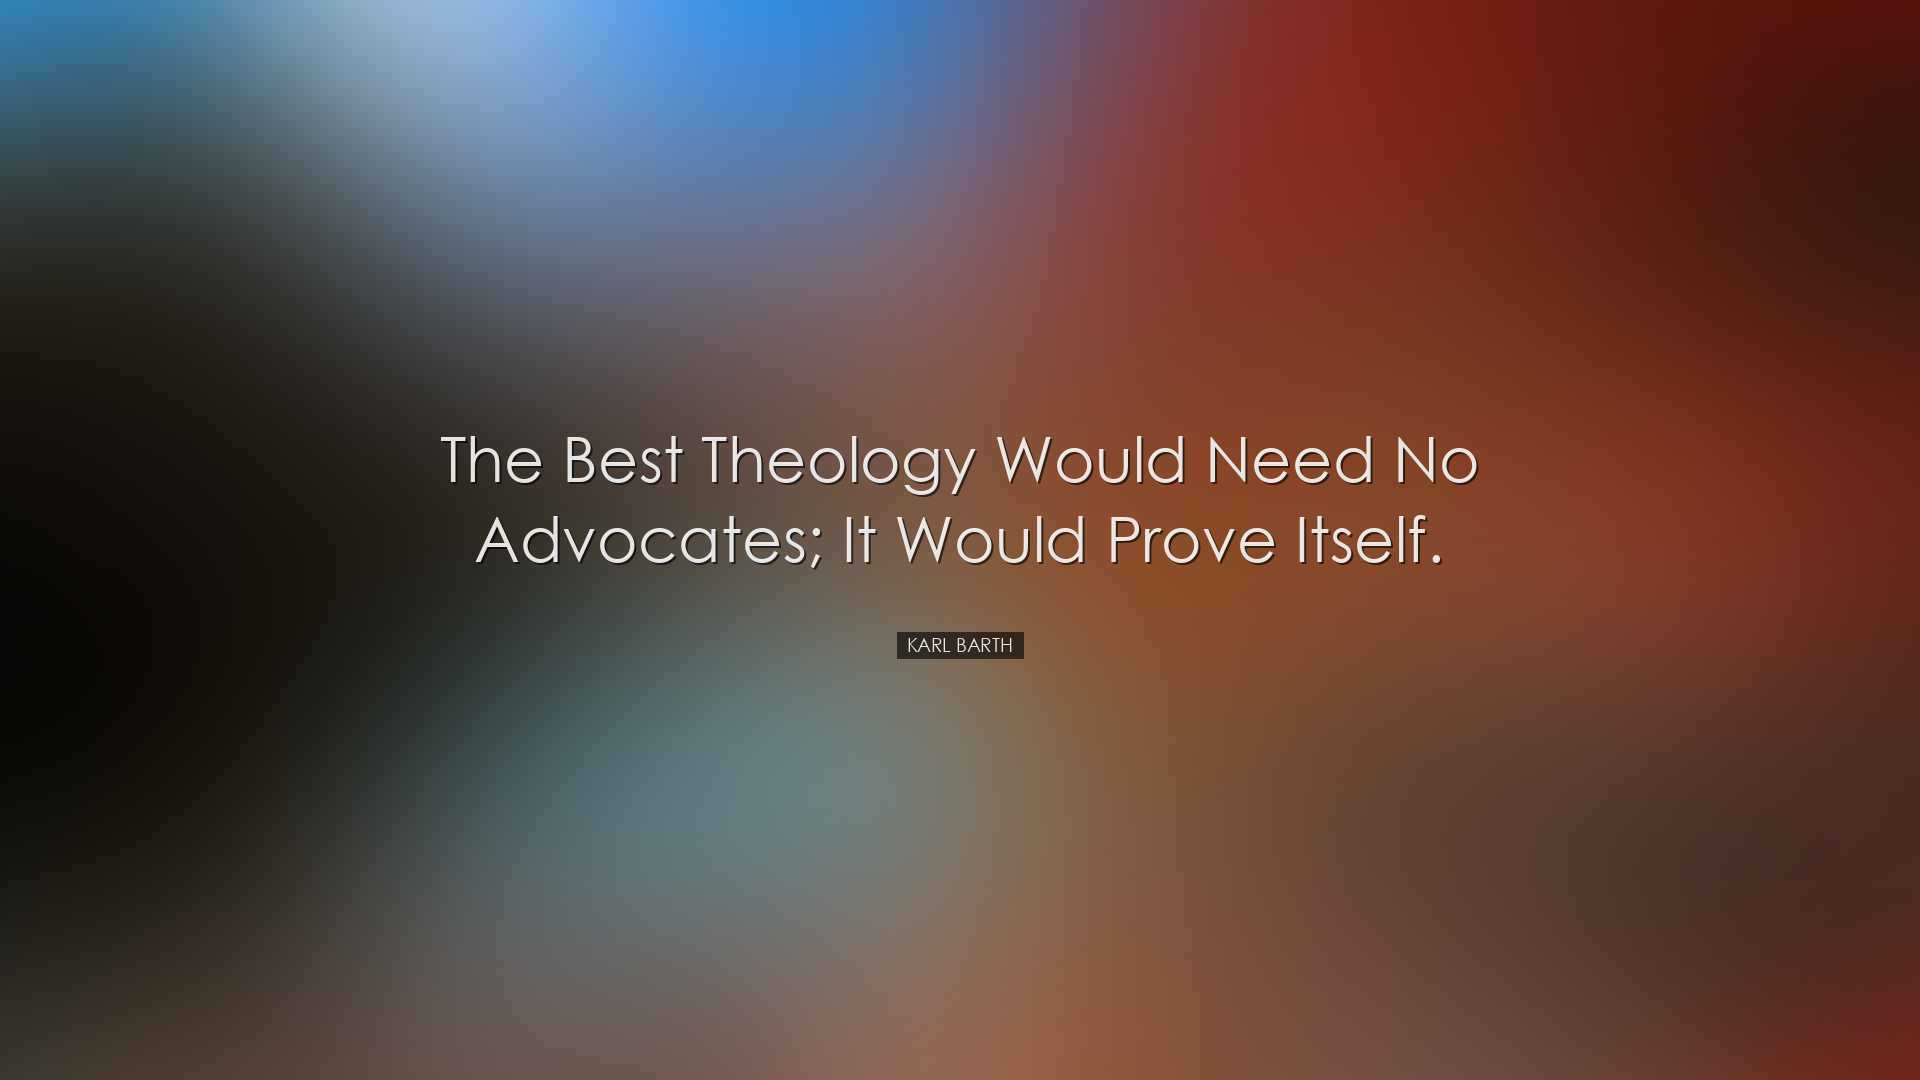 The best theology would need no advocates; it would prove itself.